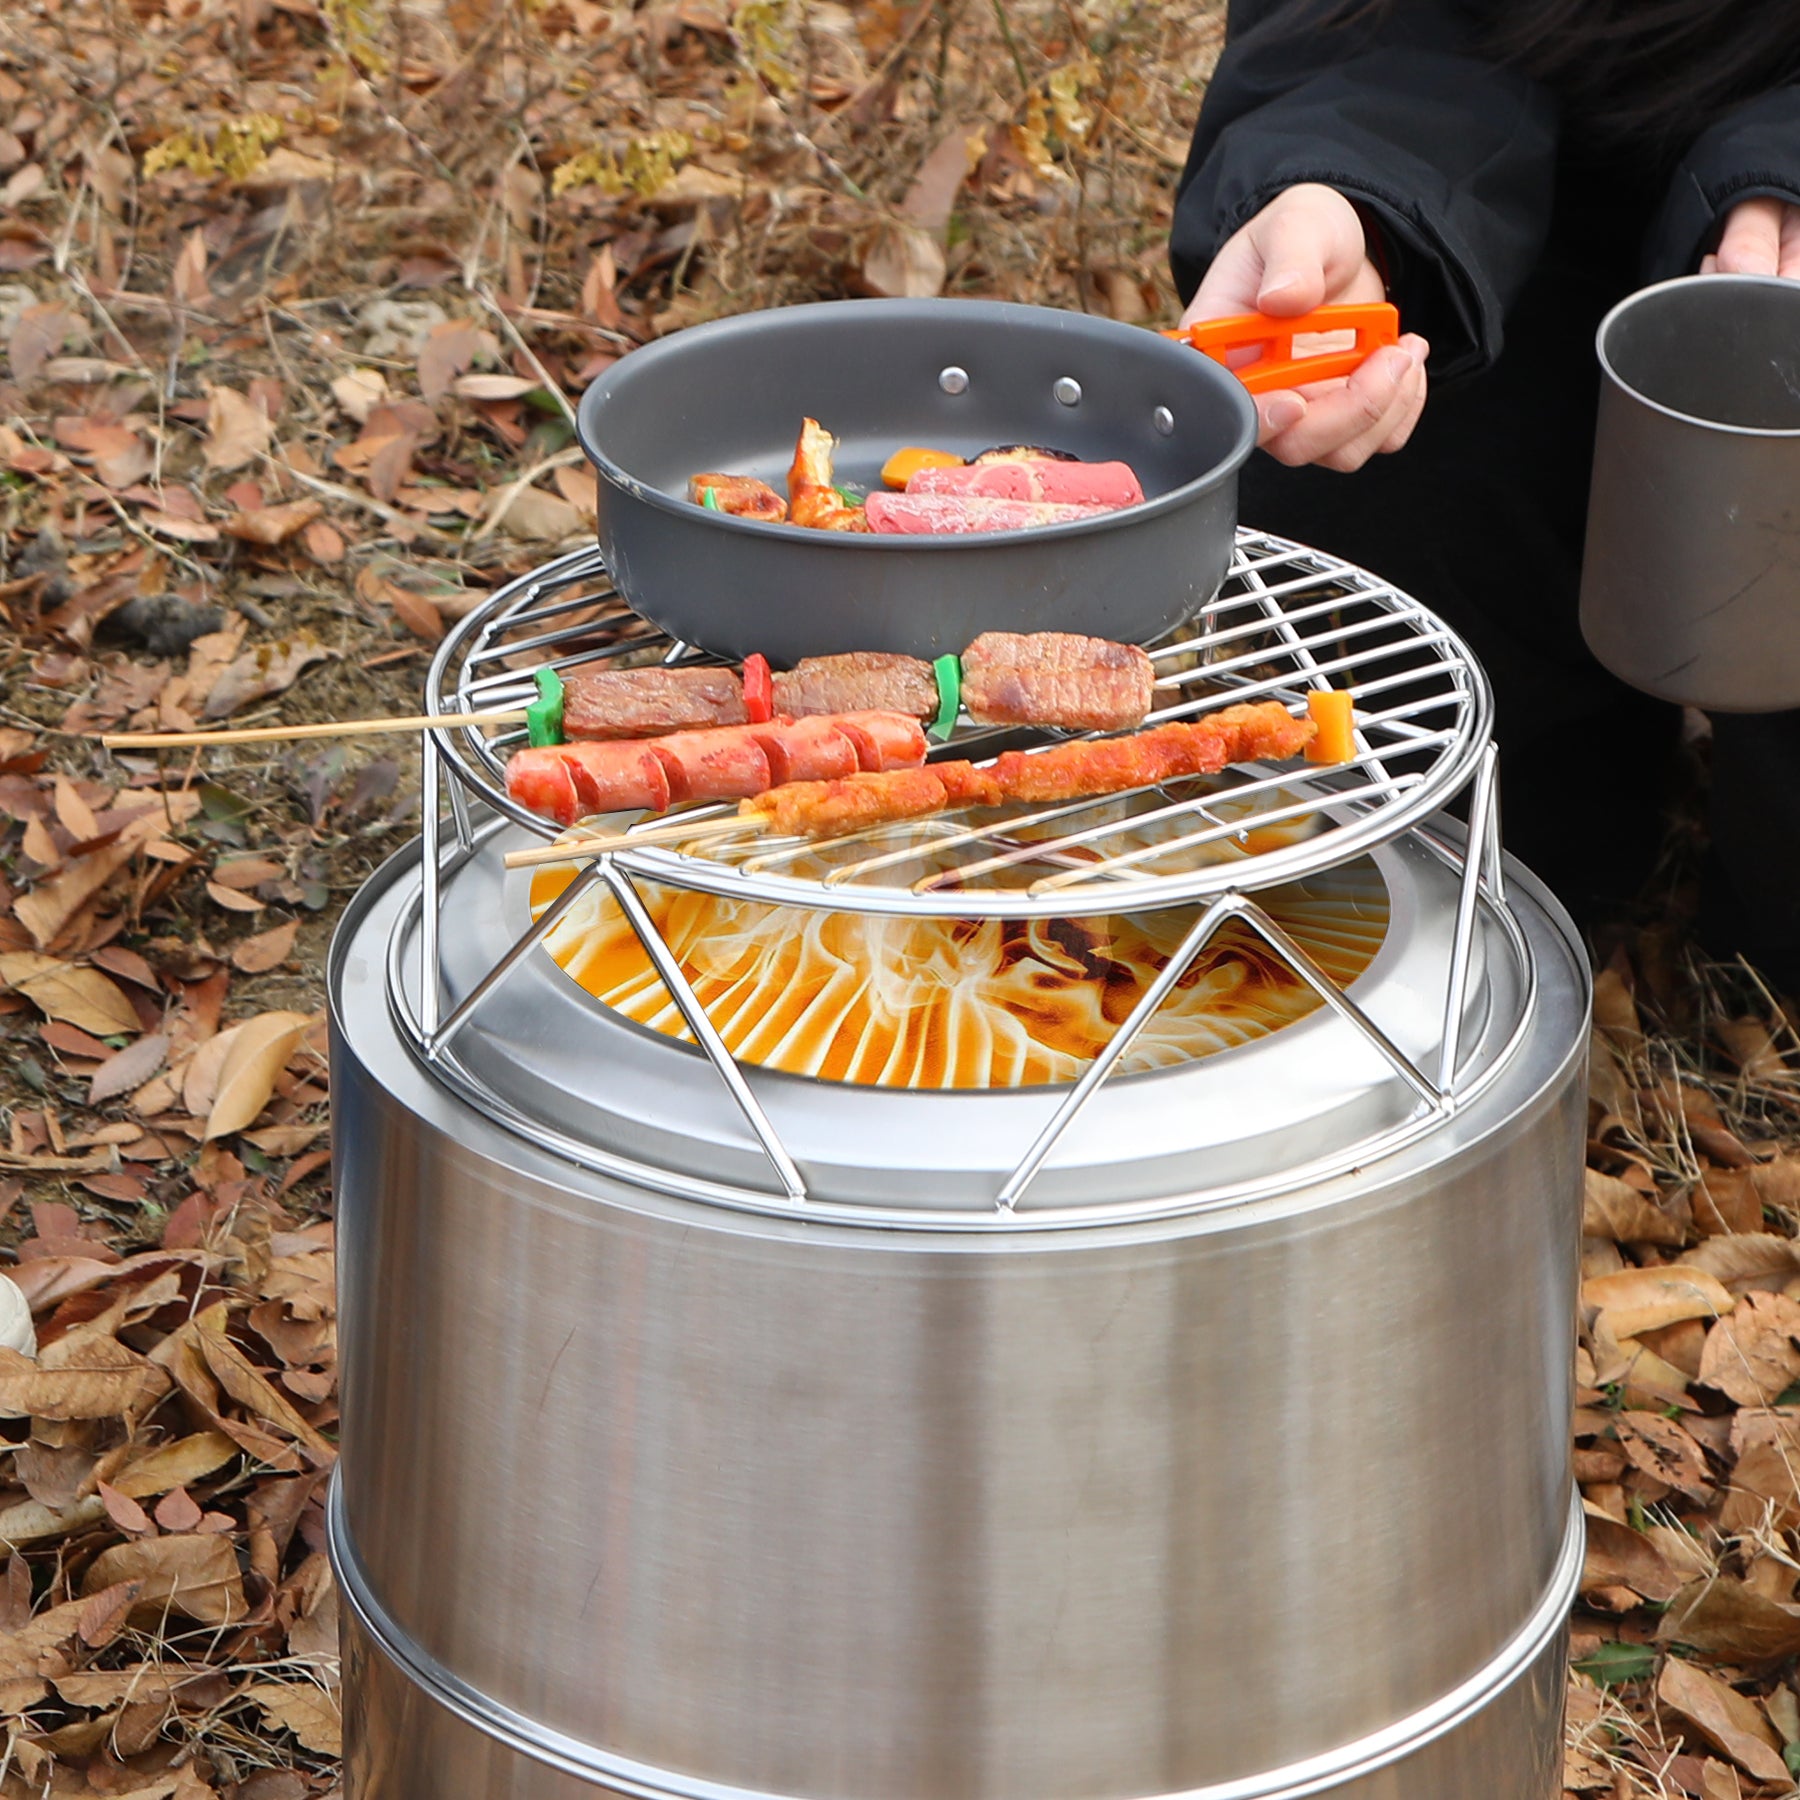 REDCAMP Fire Pit Accessory Kit for Stove